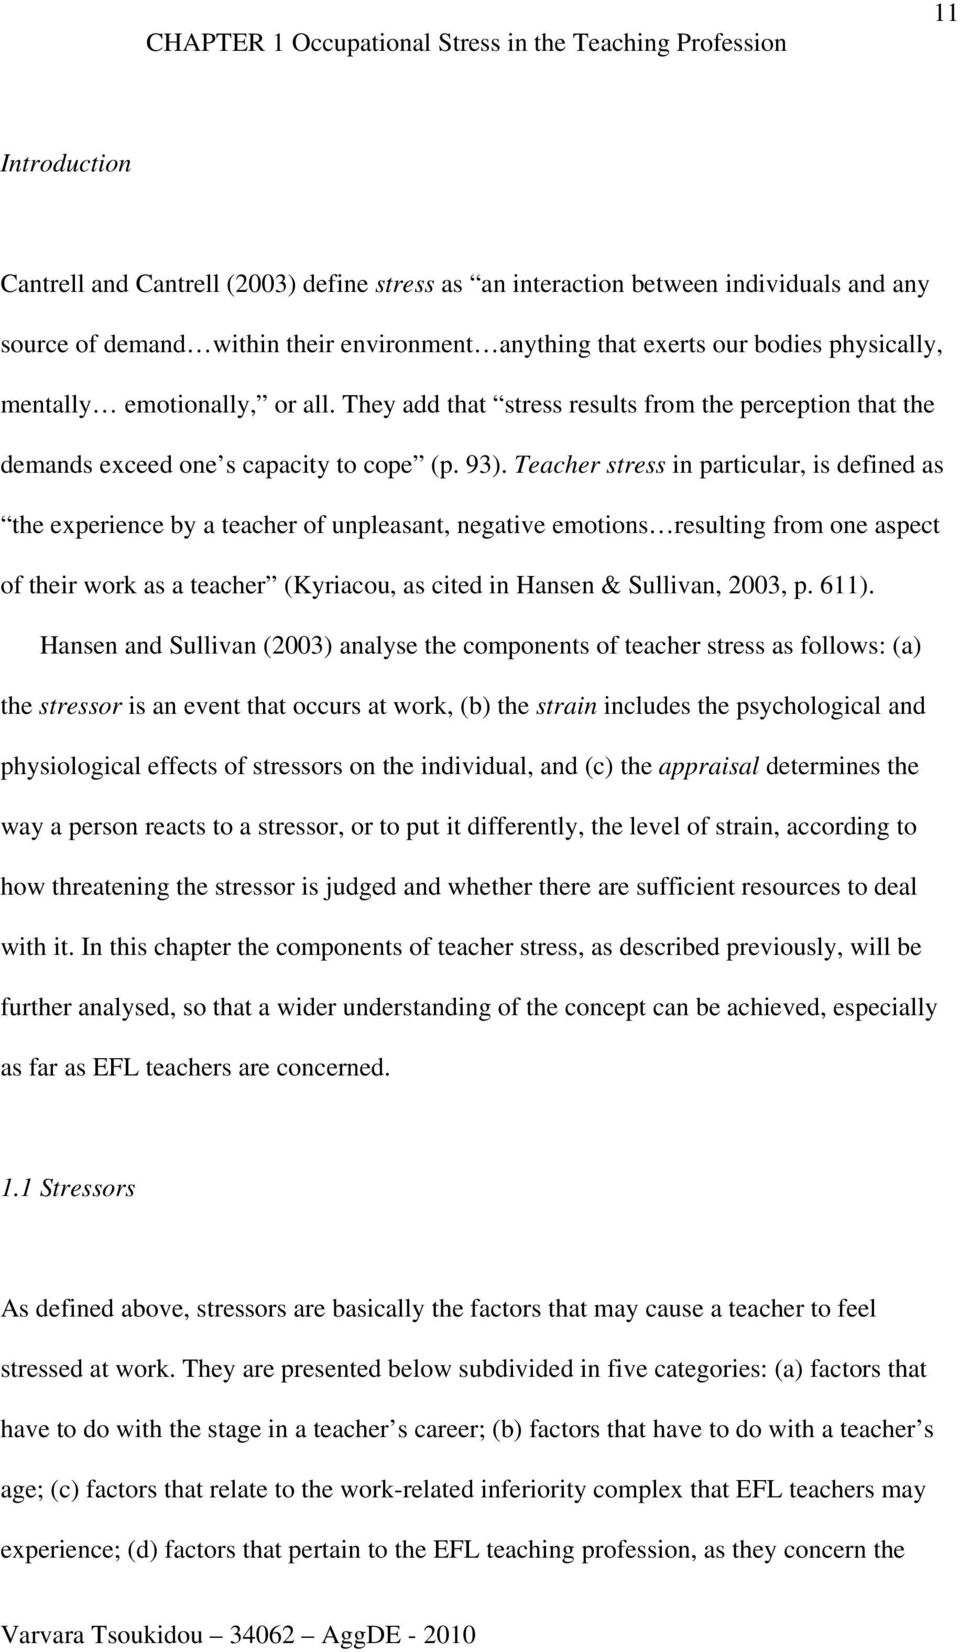 Teacher stress in particular, is defined as the experience by a teacher of unpleasant, negative emotions resulting from one aspect of their work as a teacher (Kyriacou, as cited in Hansen & Sullivan,